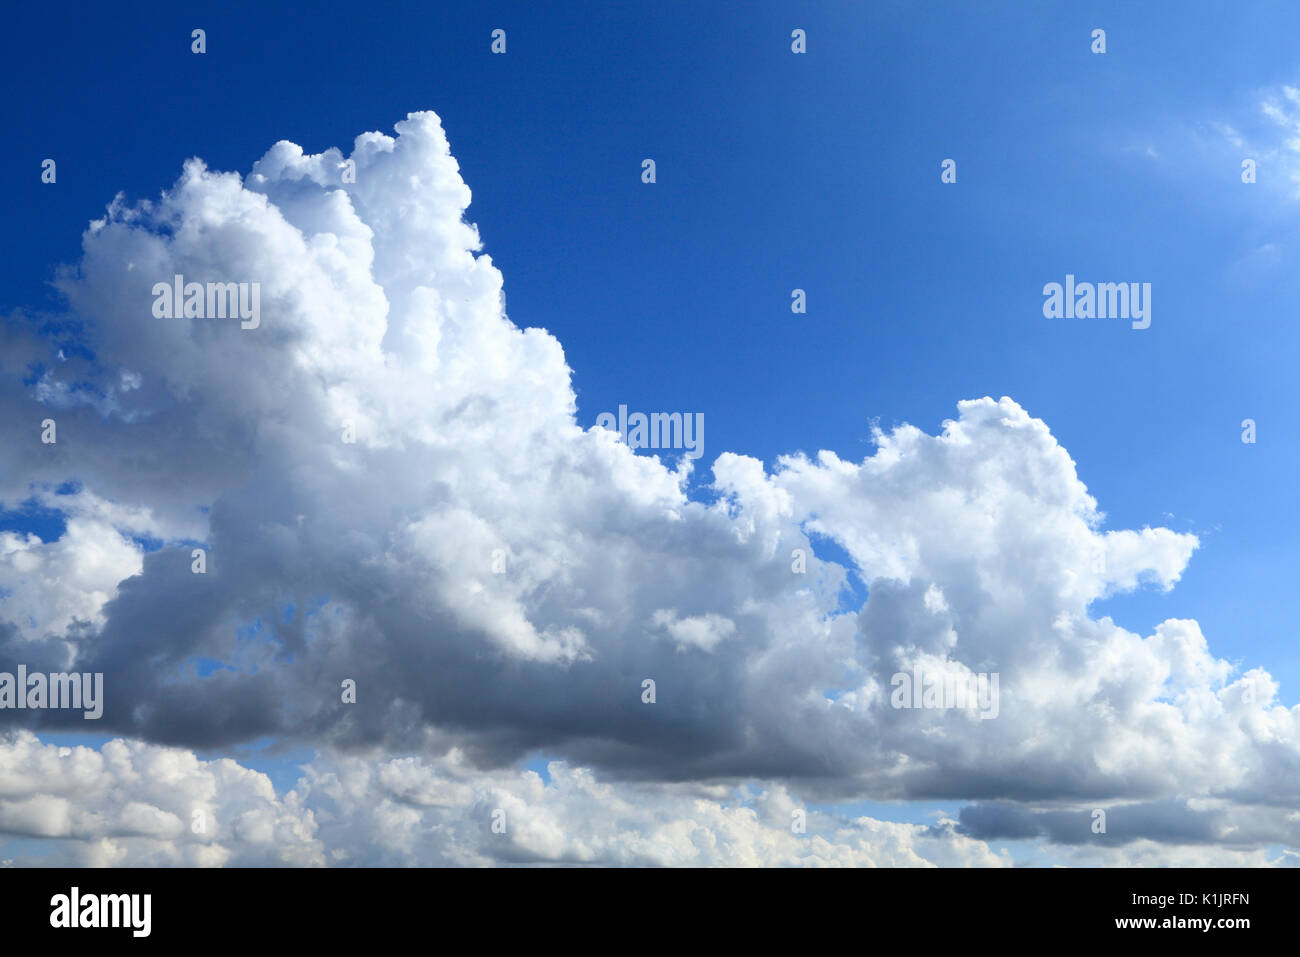 White and dark cumulous cloud, clouds, sky, skies, blue sky, weather, climate, England, UK Stock Photo